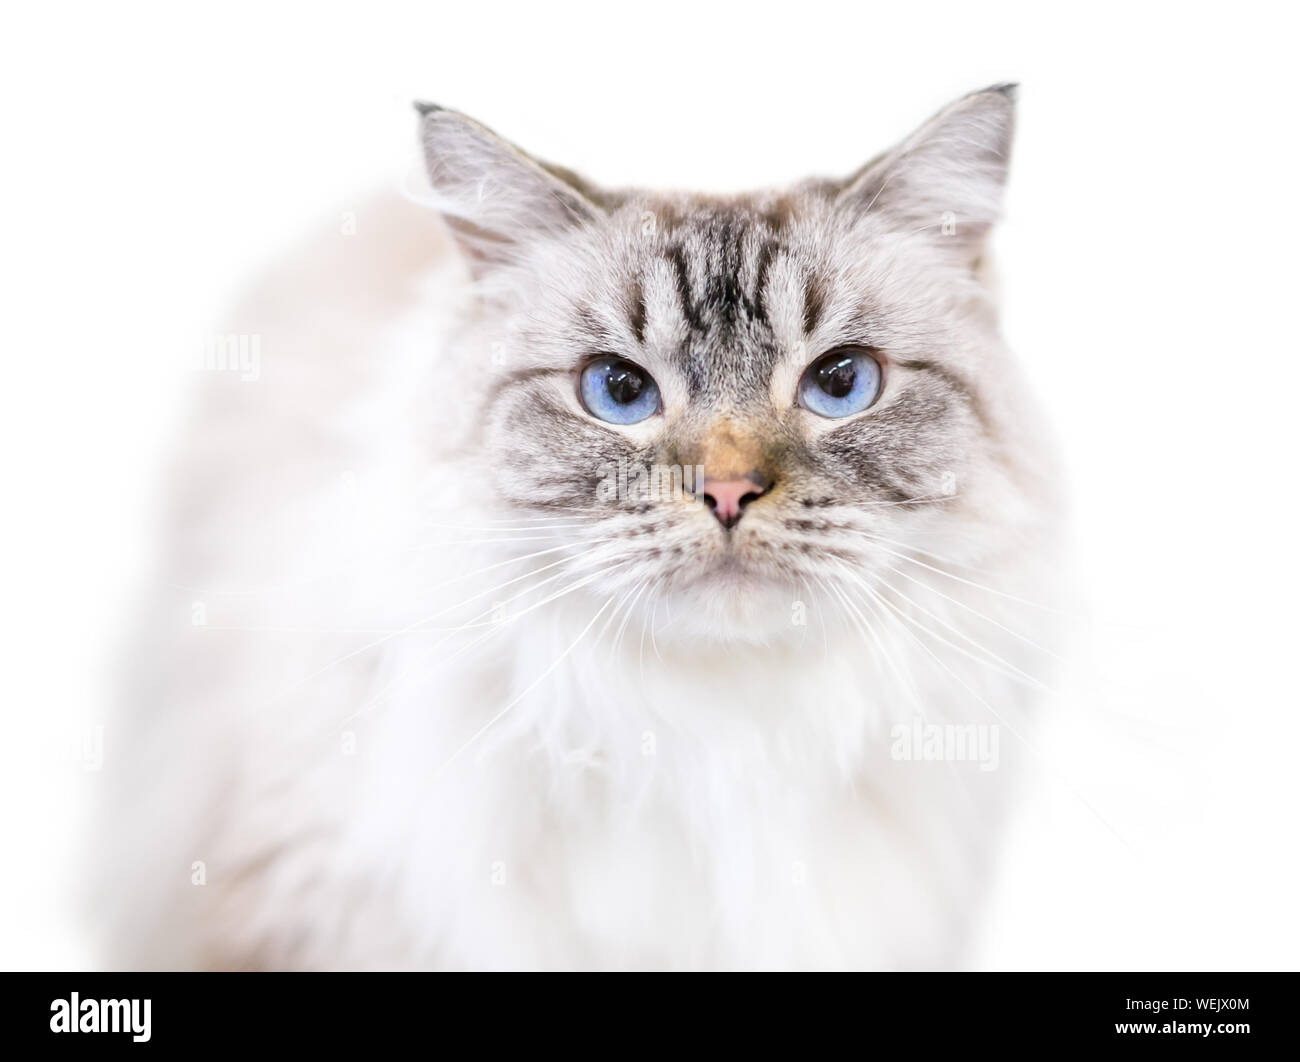 A beautiful fluffy Birman cat with tabby point markings and blue eyes Stock Photo